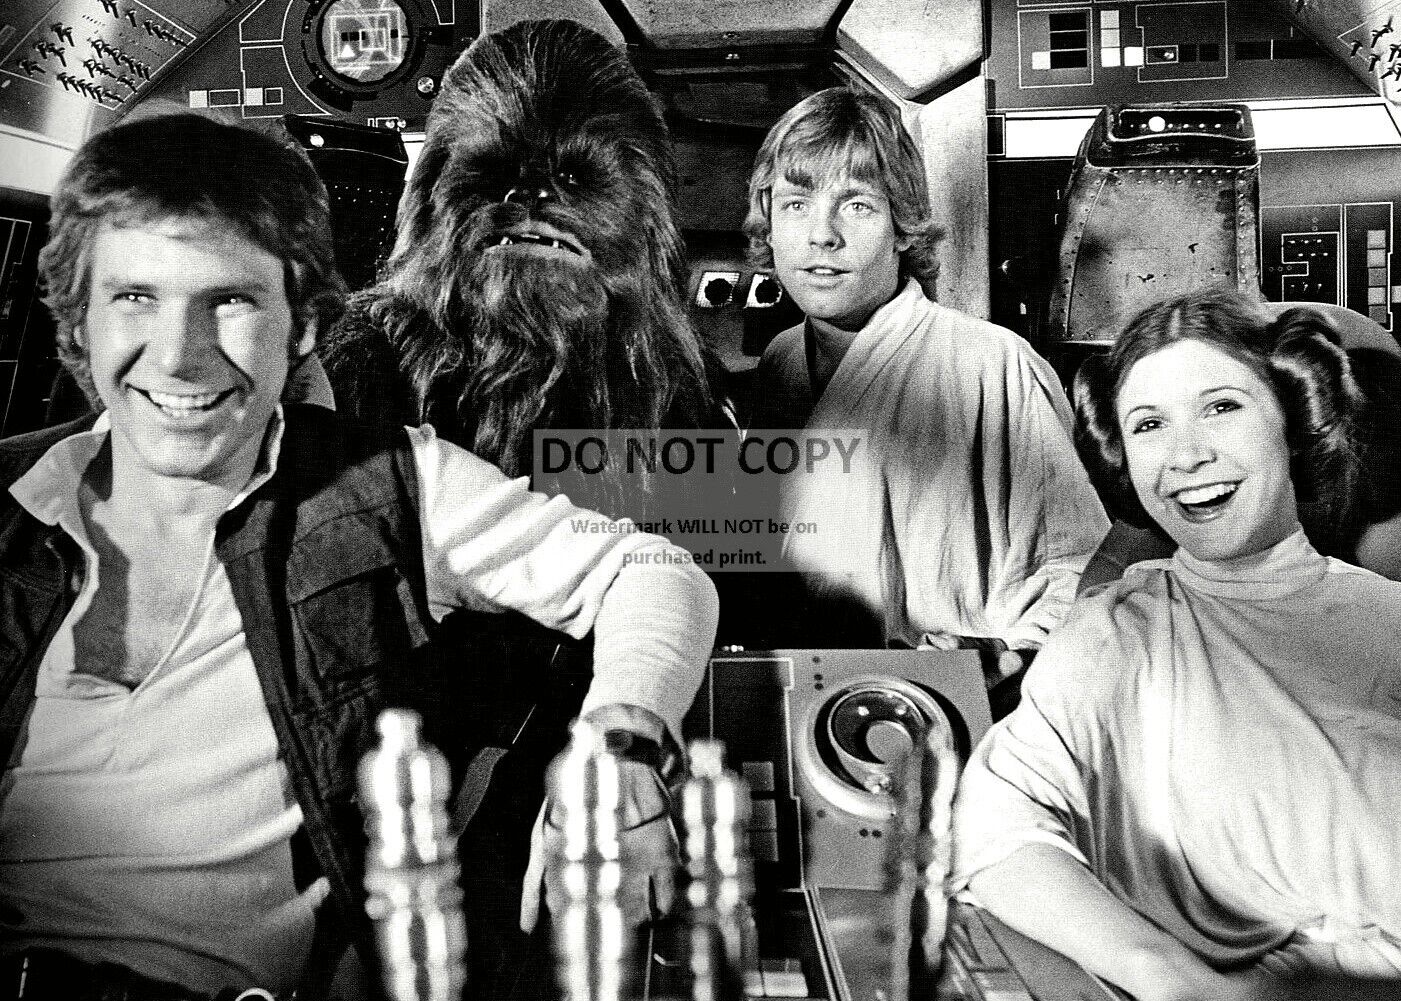 *5X7* PHOTO - HARRISON FORD, MARK HAMILL & CARRIE FISHER IN 